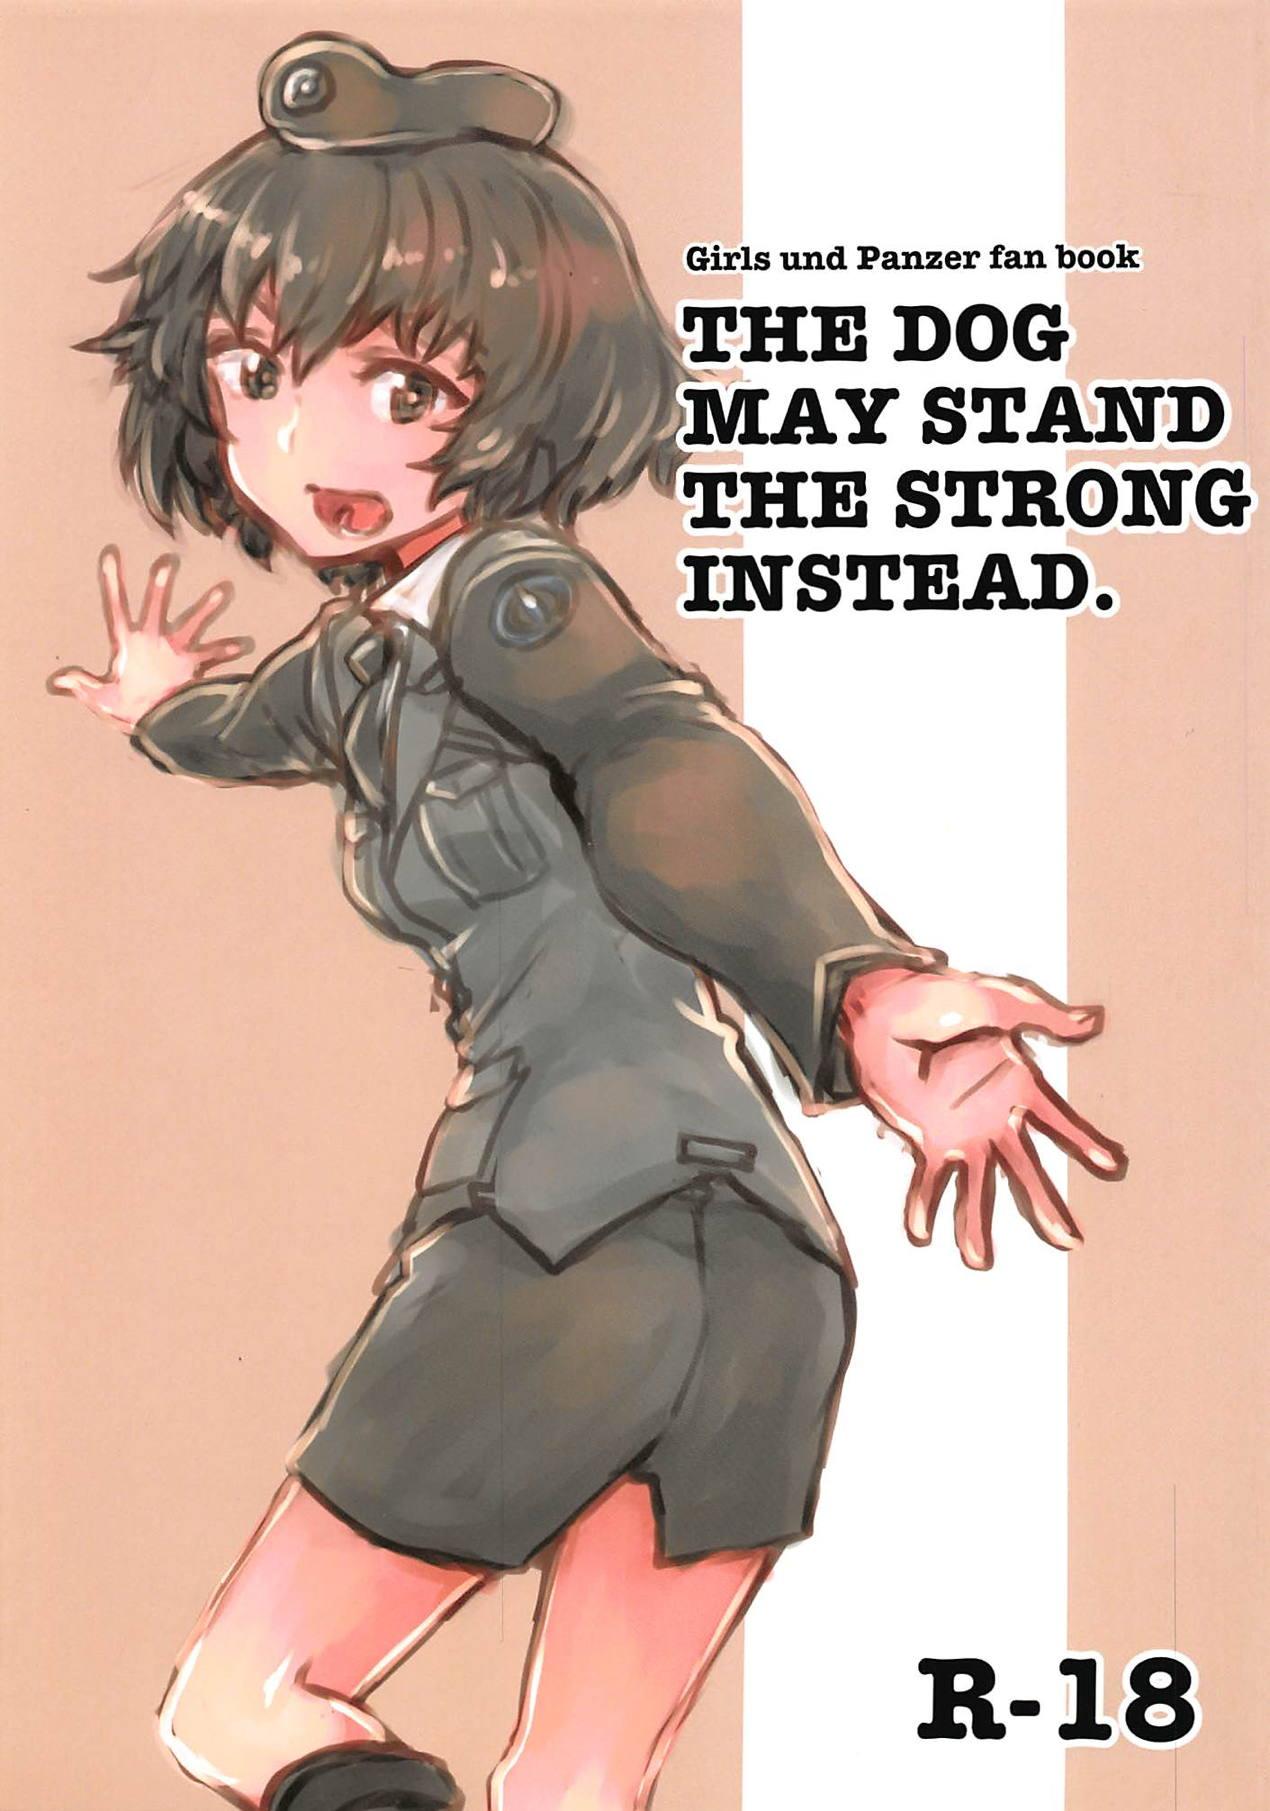 THE DOG MAY STAND THE STRONG INSTEAD 0